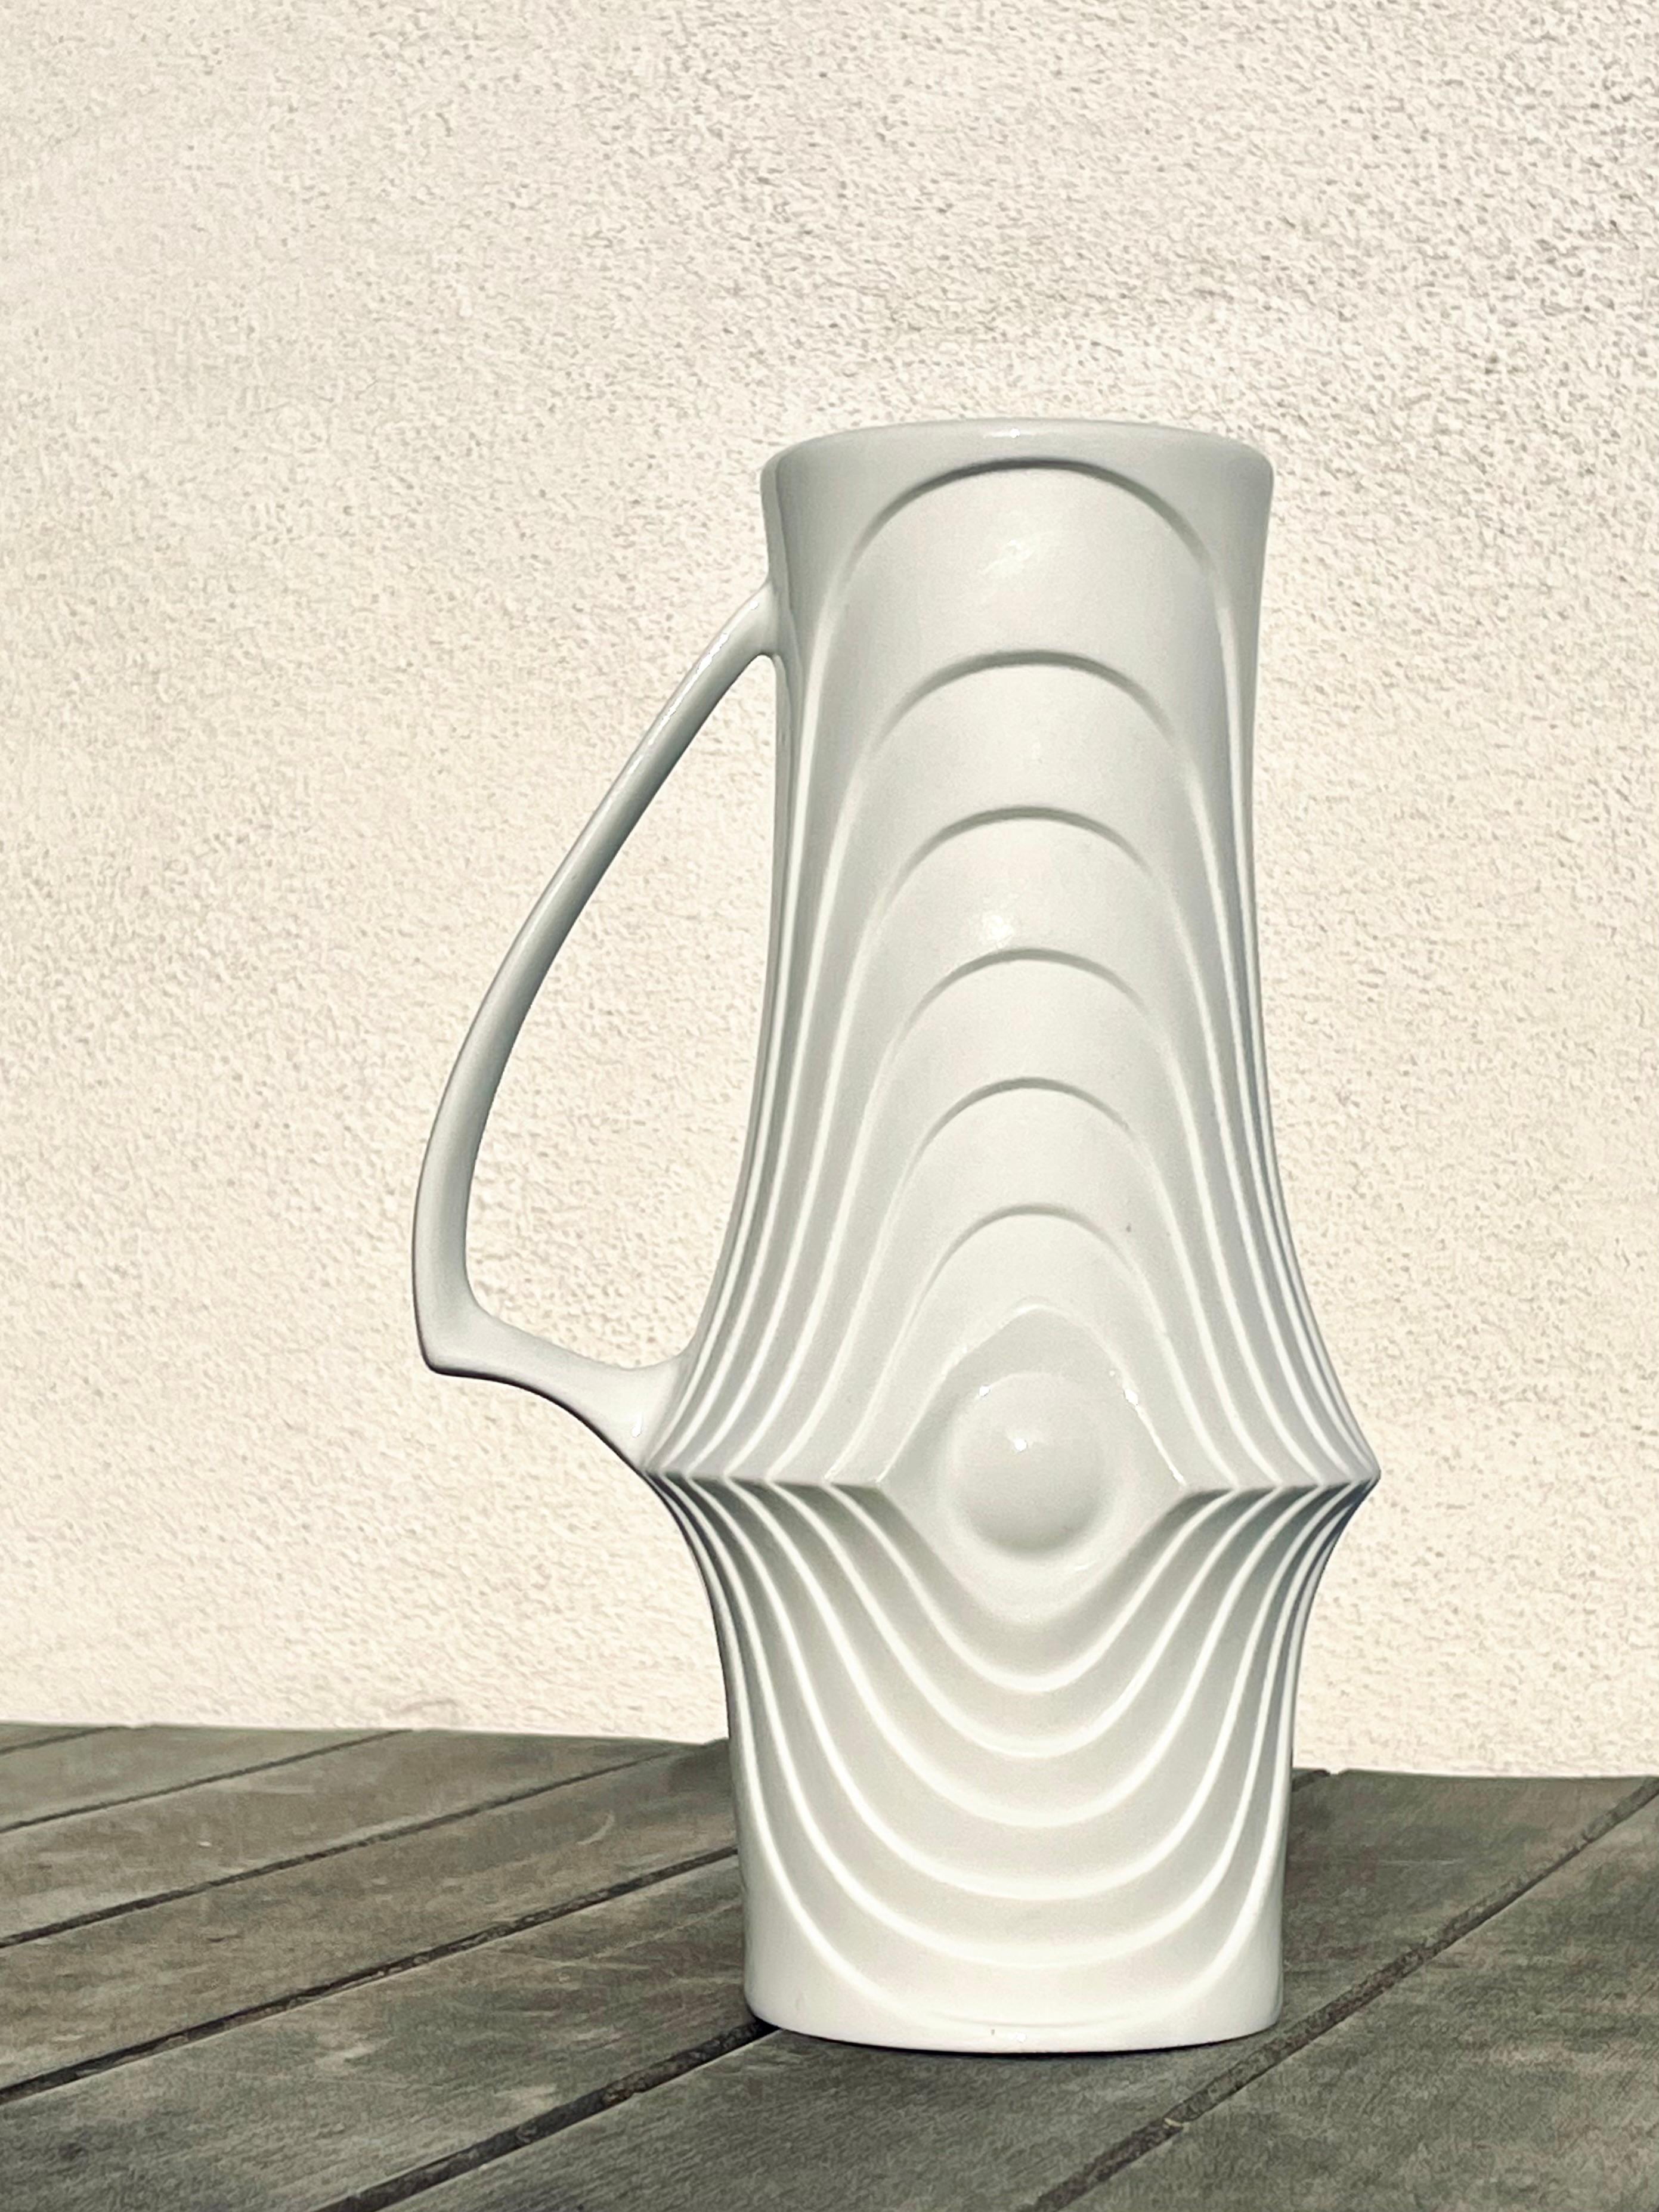 Handmade Modern Op Art bone white modernist textured handle vase of high quality bisque porcelain. Sculptural Art Deco angled shape with low placed slender triangular handle on one side. The interior has been given a clear glossy glaze, and the same